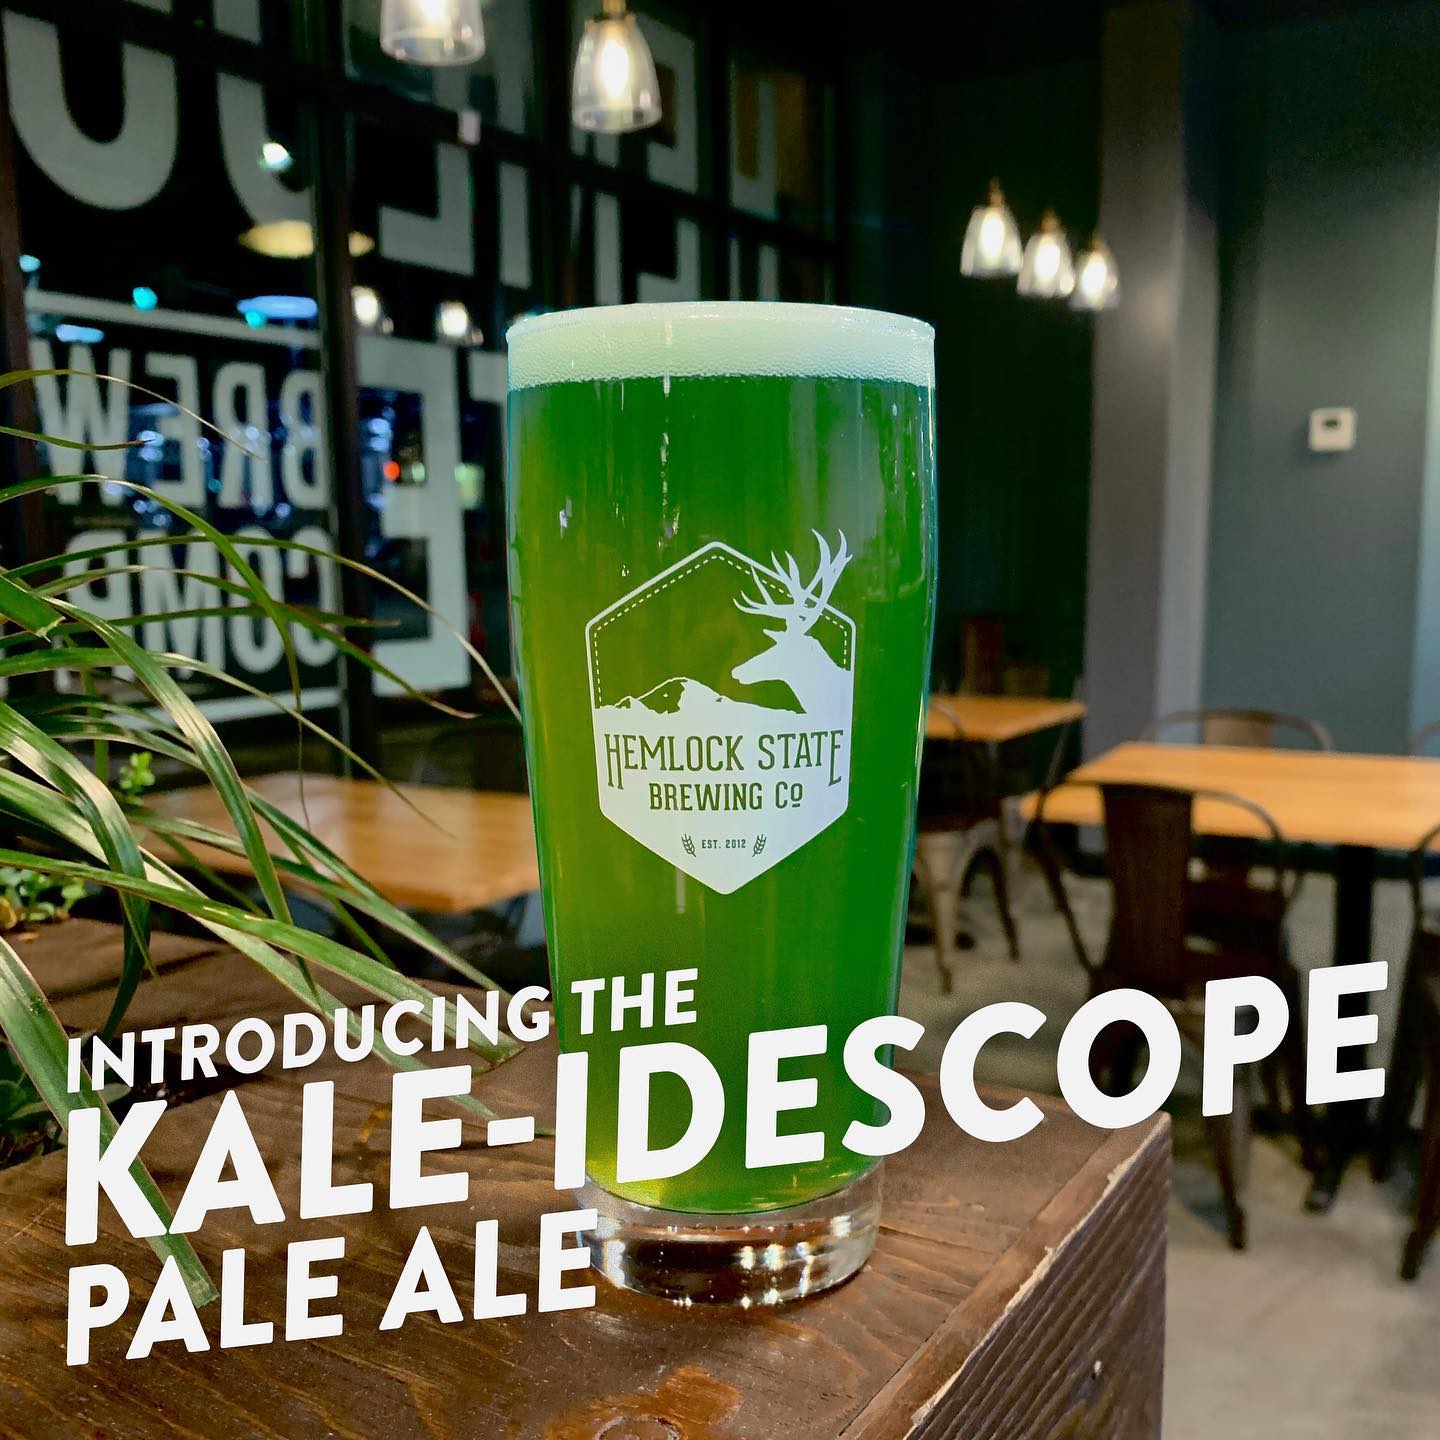 Albeit a bit late, we’re excited to finally release our newest addition to our taplist, The Kale-idescope Pale, aptly named since we’ve added fresh kale to the delightfully balanced grain bill.